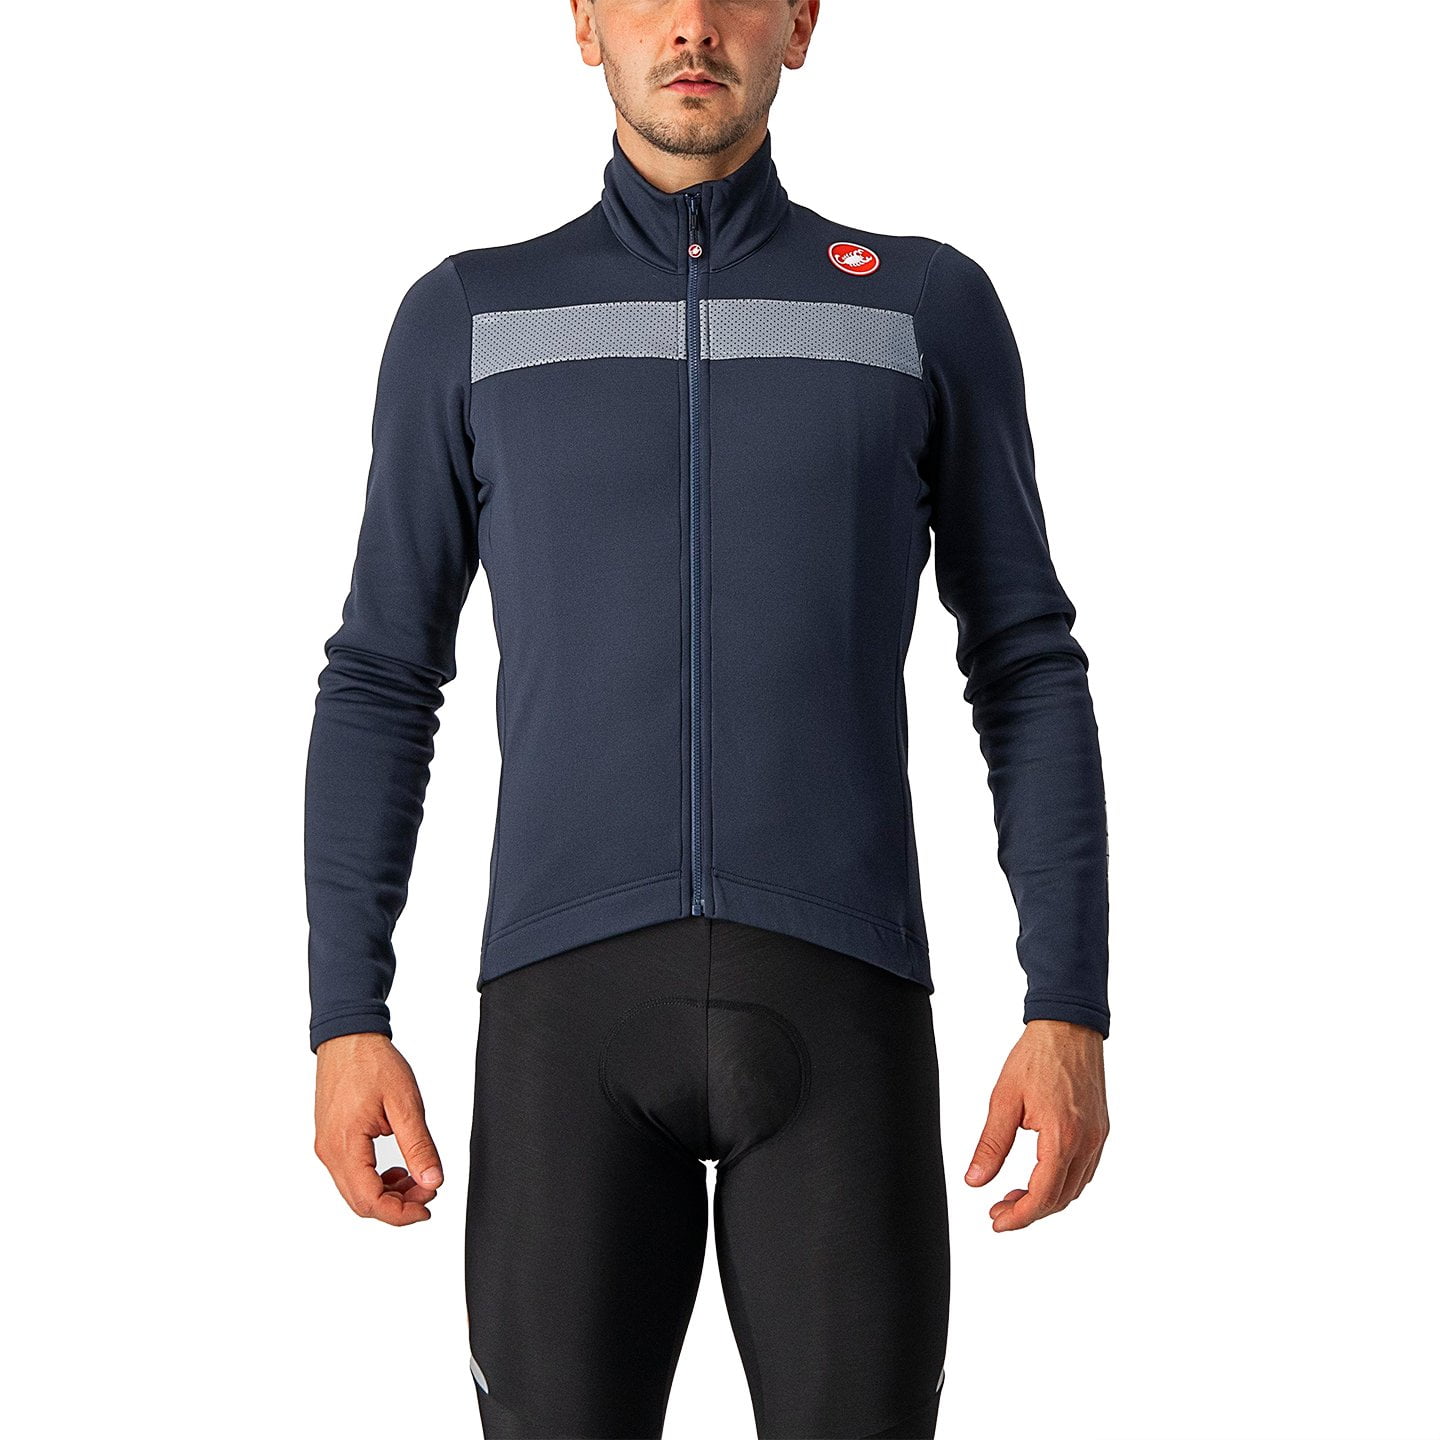 CASTELLI Puro 3 Long Sleeve Jersey Long Sleeve Jersey, for men, size L, Cycling jersey, Cycling clothing